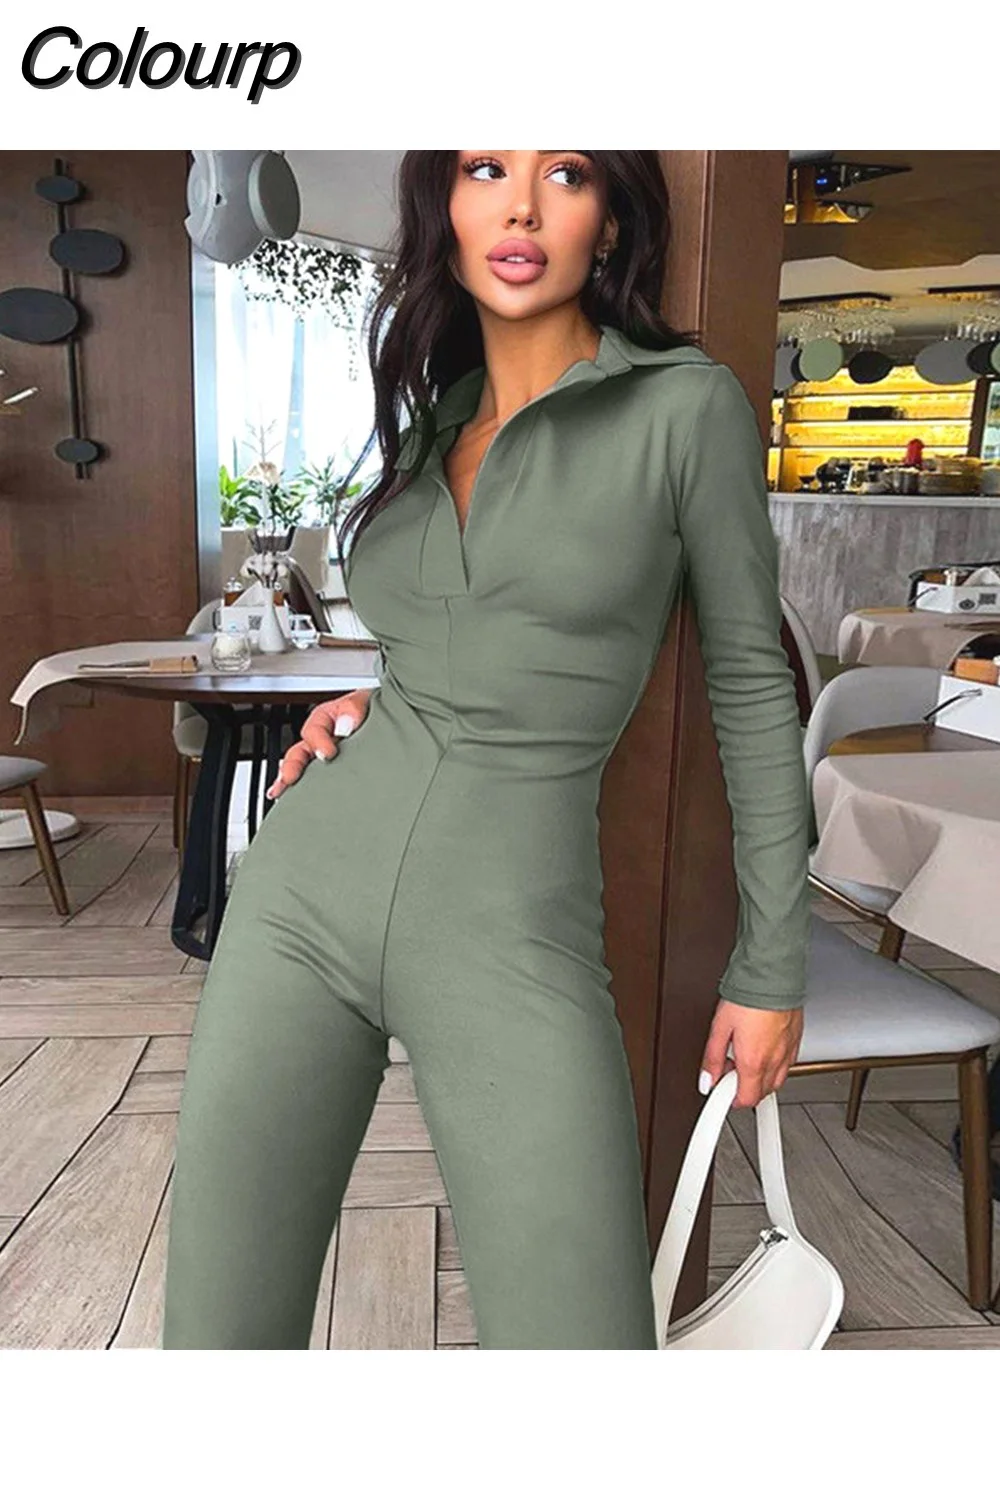 Colourp 2023 Winter Sporty Slim Fitness Jumpsuit Women Rompers Pure Color Casual Streetwear Overalls Female One Piece Jumpsuits